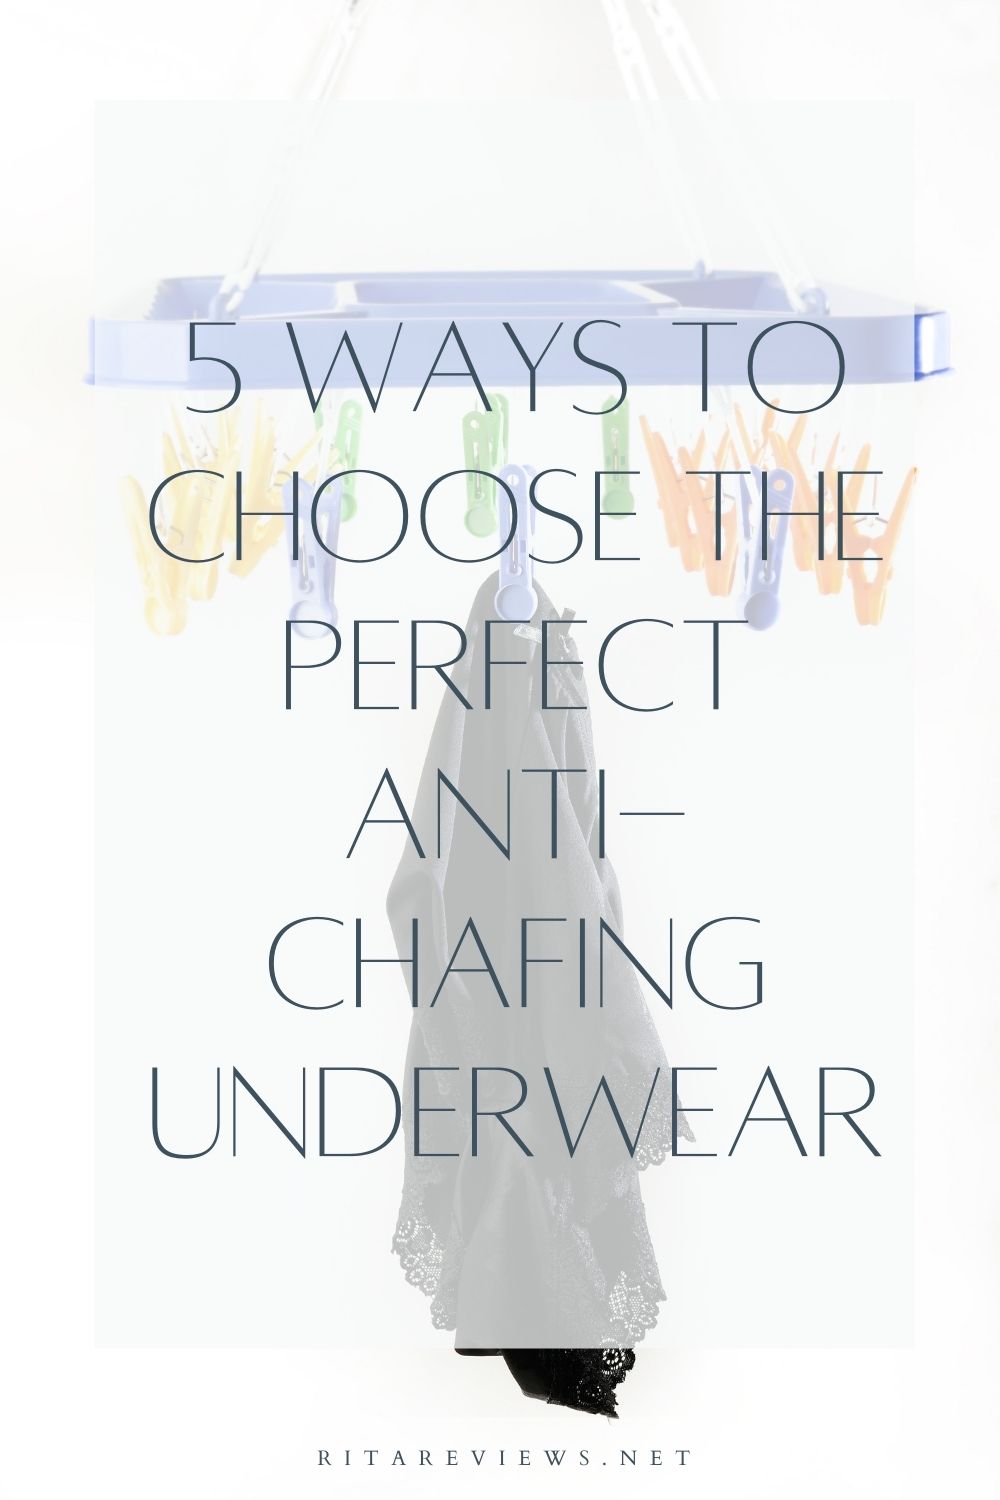 5 Ways to Choose the Perfect Anti-Chafing Underwear